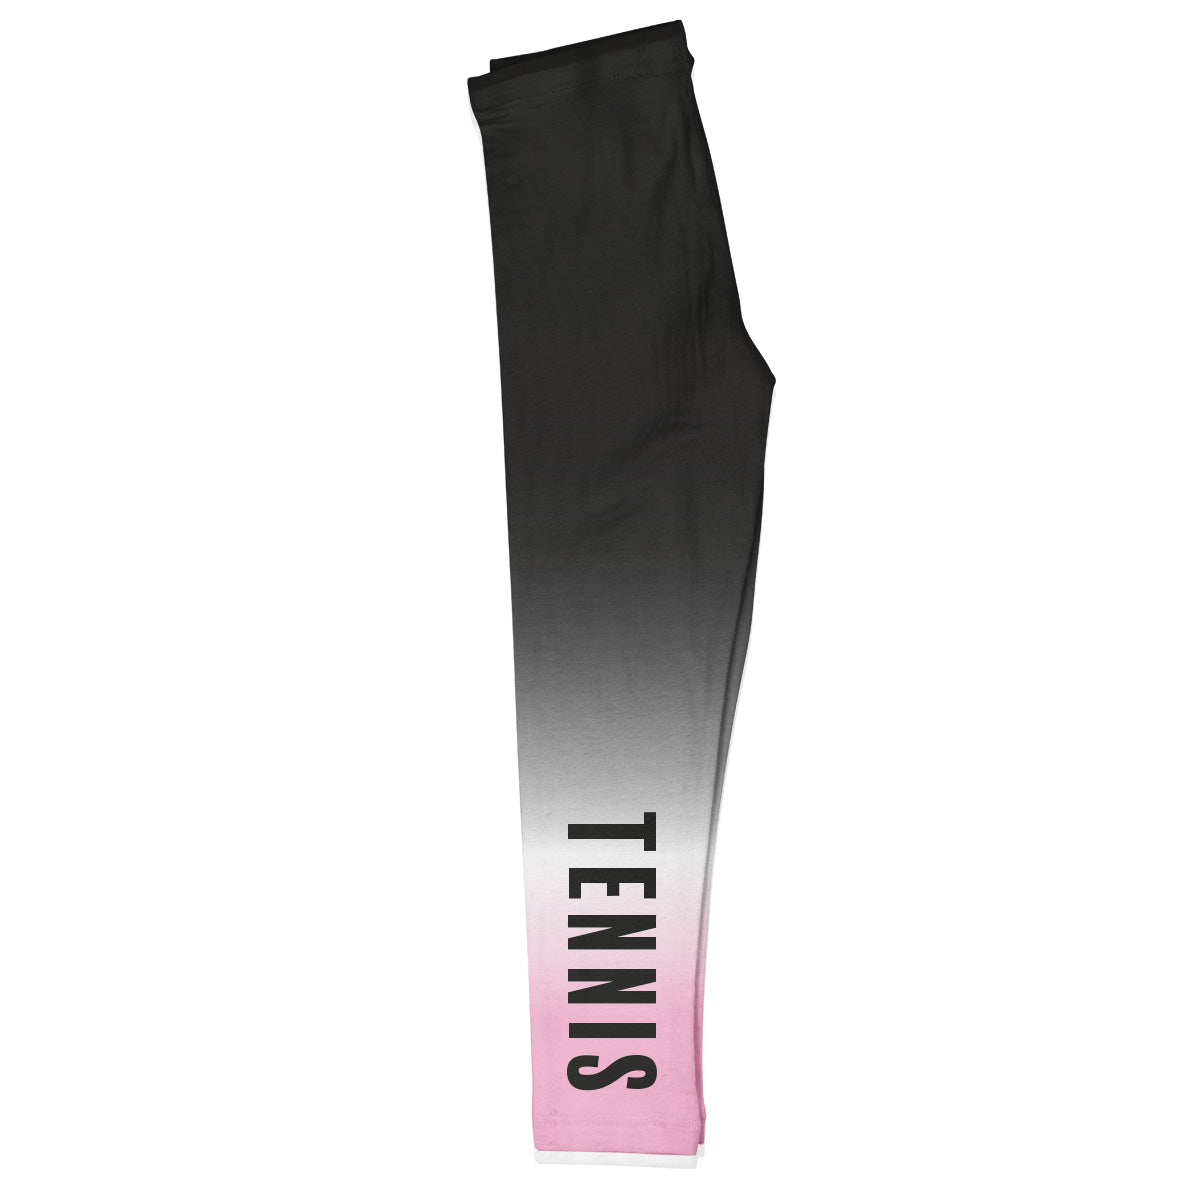 Tennis Degrade Black and Pink Leggings - Wimziy&Co.